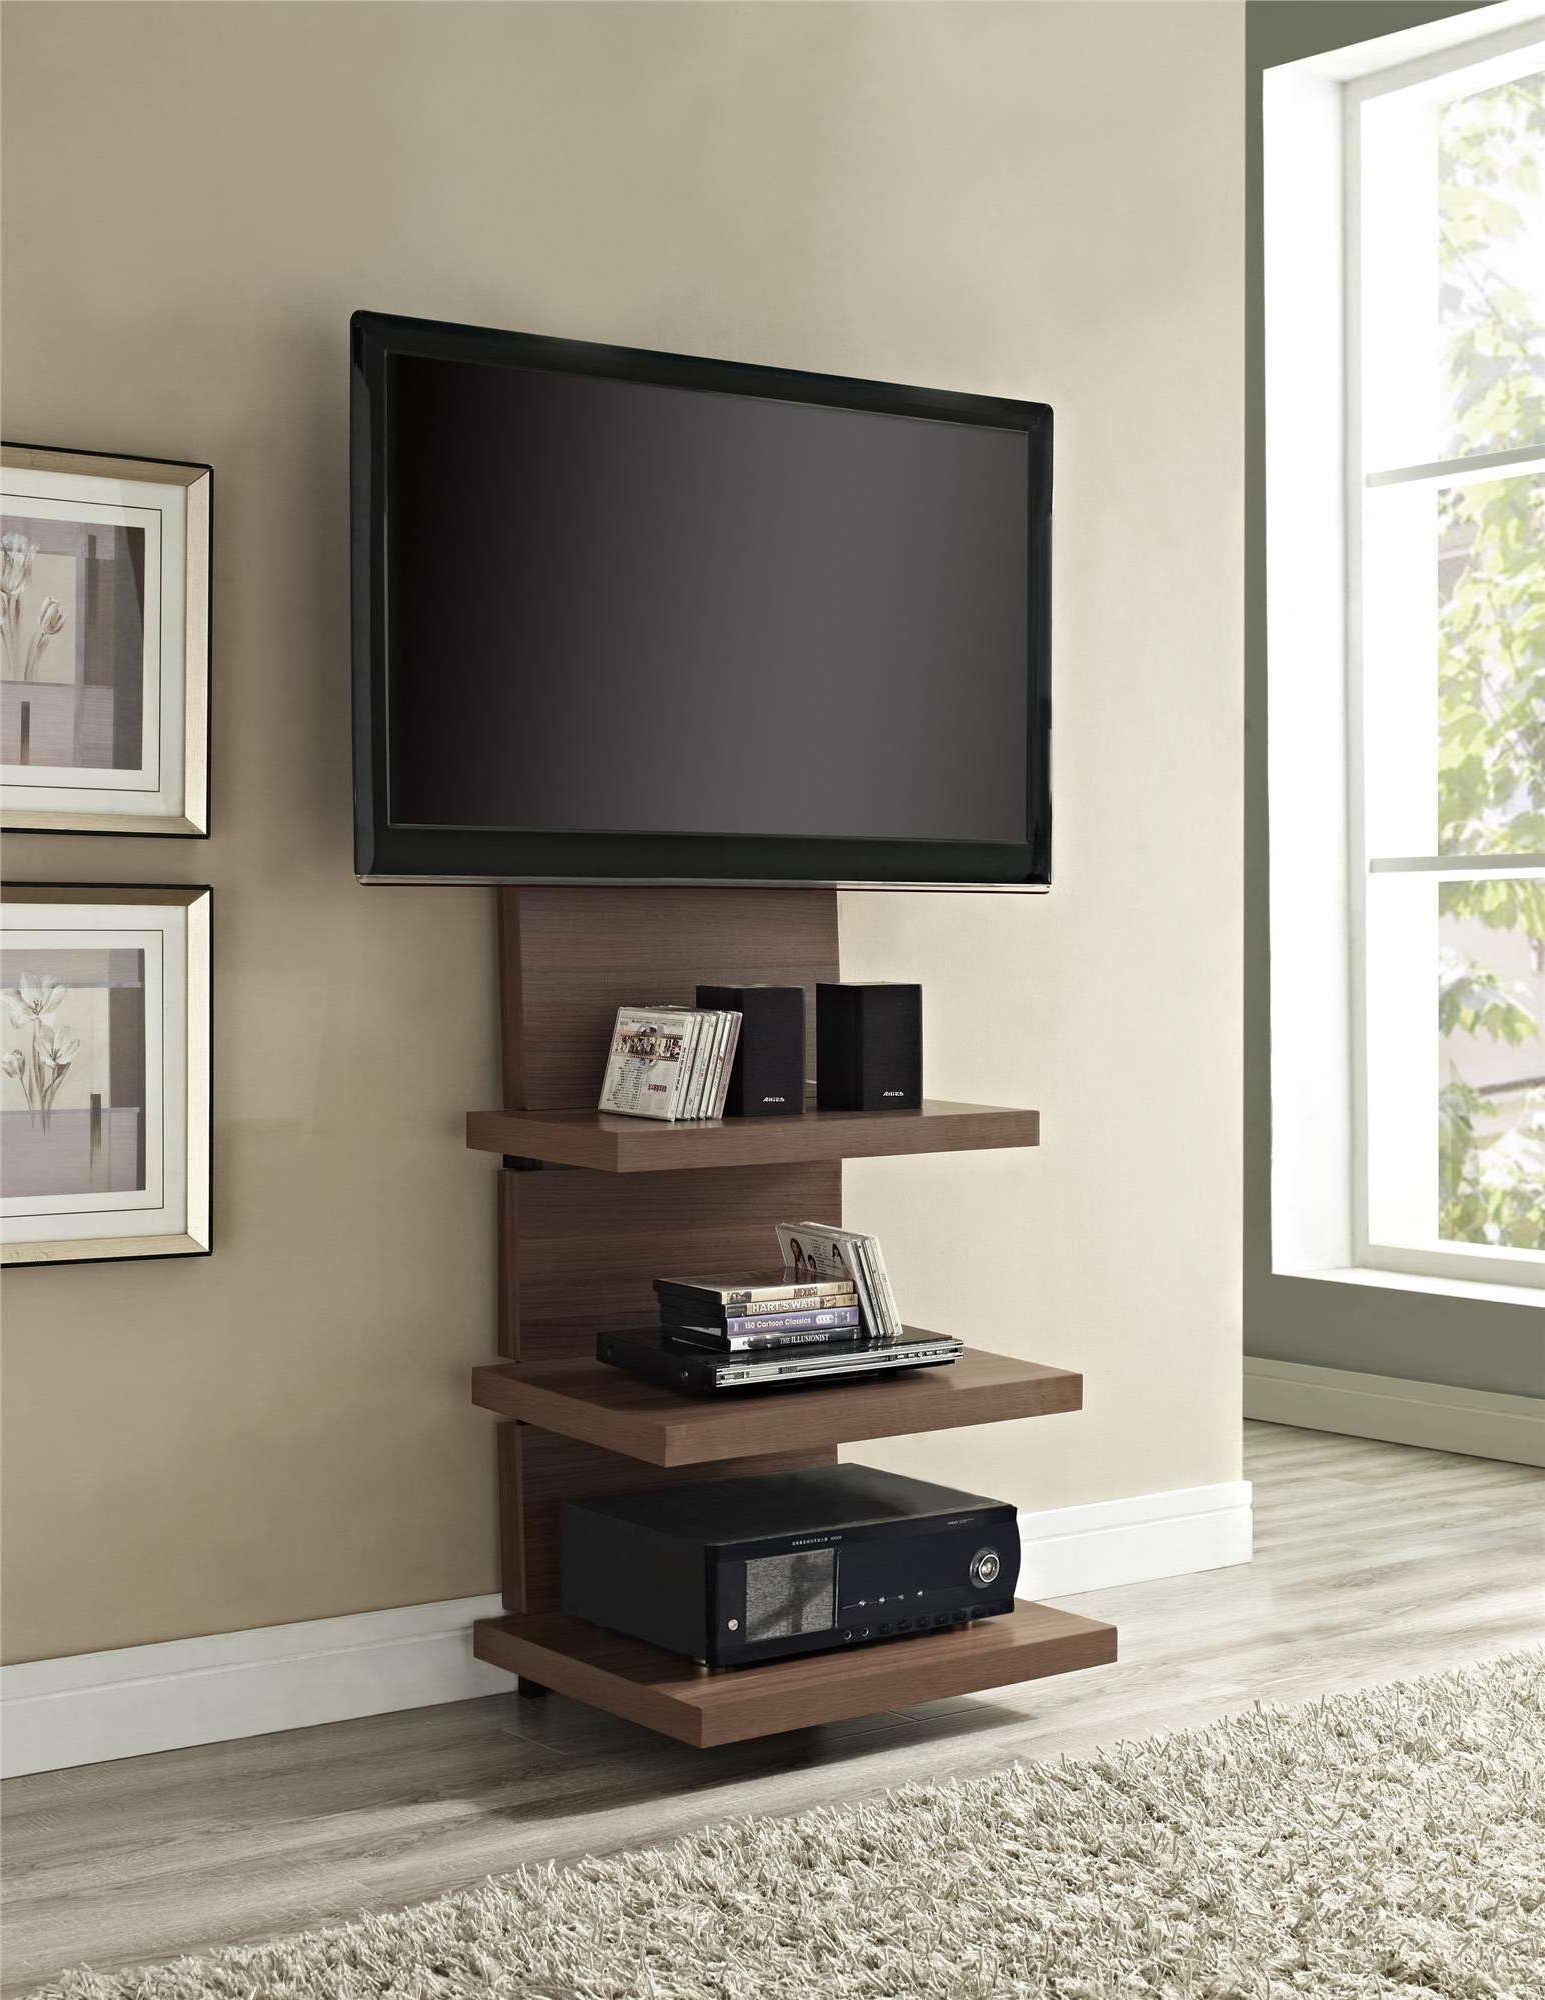 Current Tall Tv Stand Stands For Flat Screens Ikea Shallow Console Narrow Regarding Tall Narrow Tv Stands (View 3 of 20)